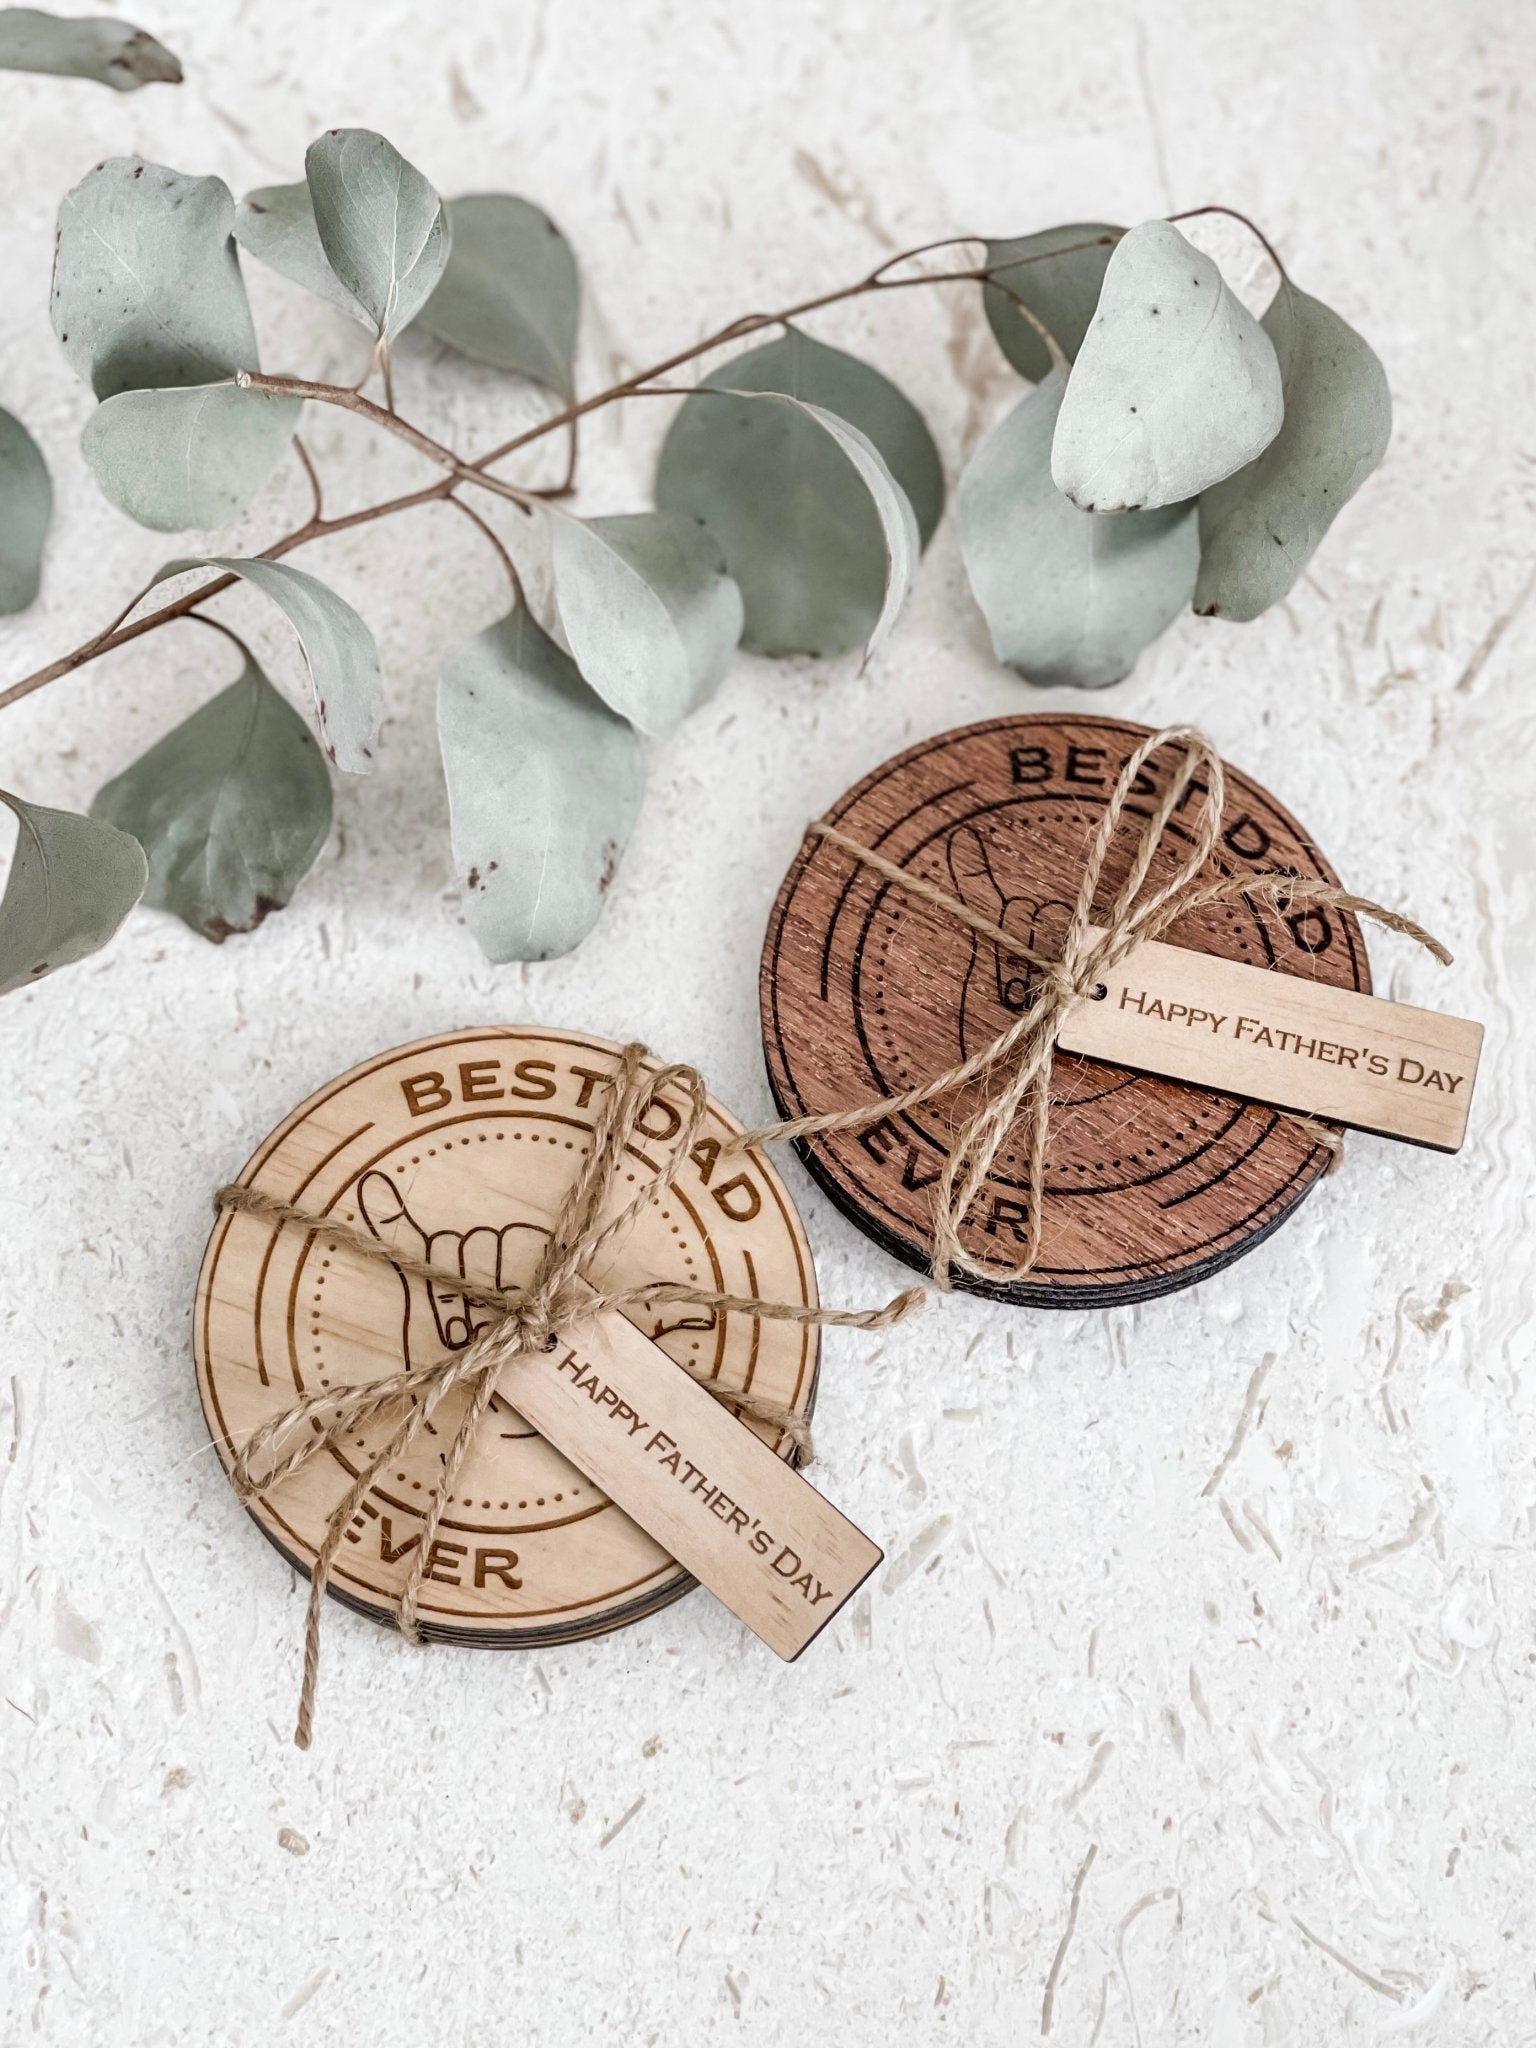 Best Dad Ever Coasters - The Humble Gift Co.